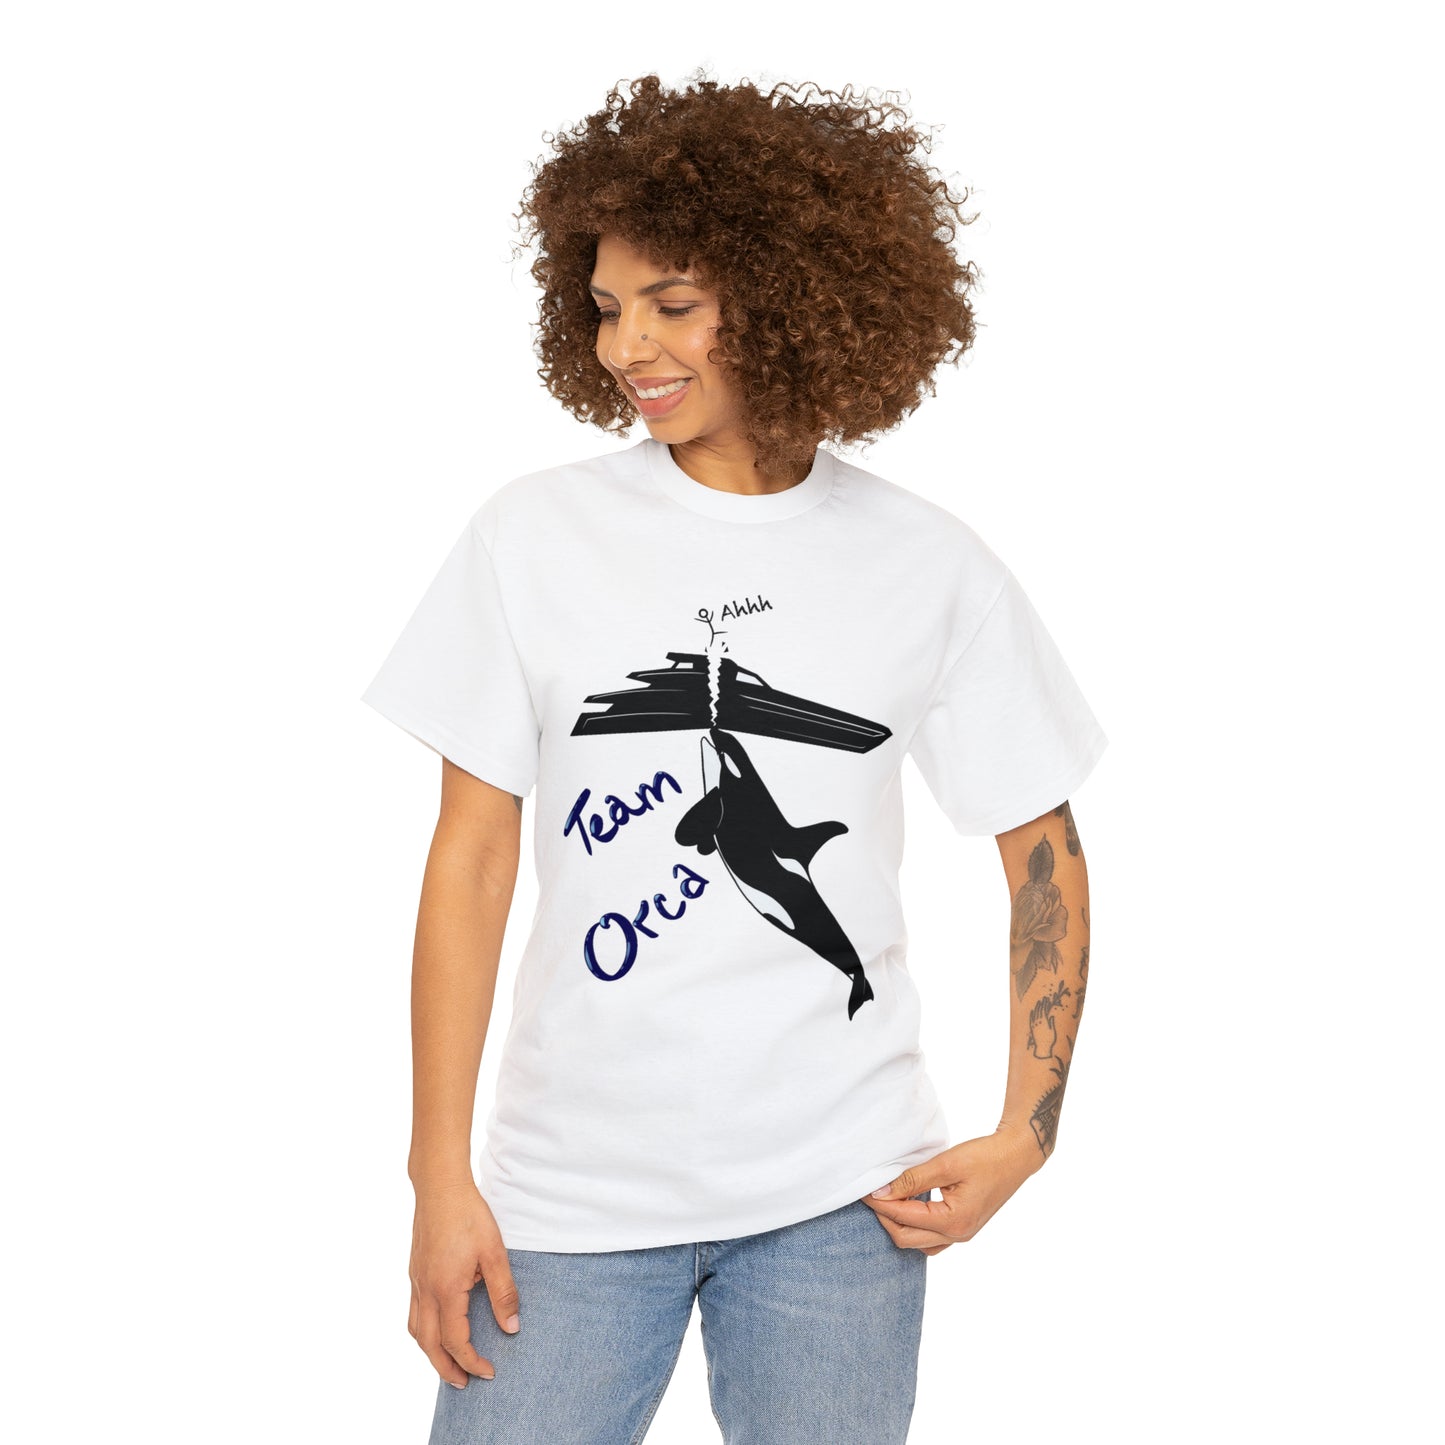 The Team Orca unisex heavy cotton tee is the basic staple of any wardrobe. It is the foundation upon which casual fashion grows. All it needs is a personalized design to elevate things to profitability.